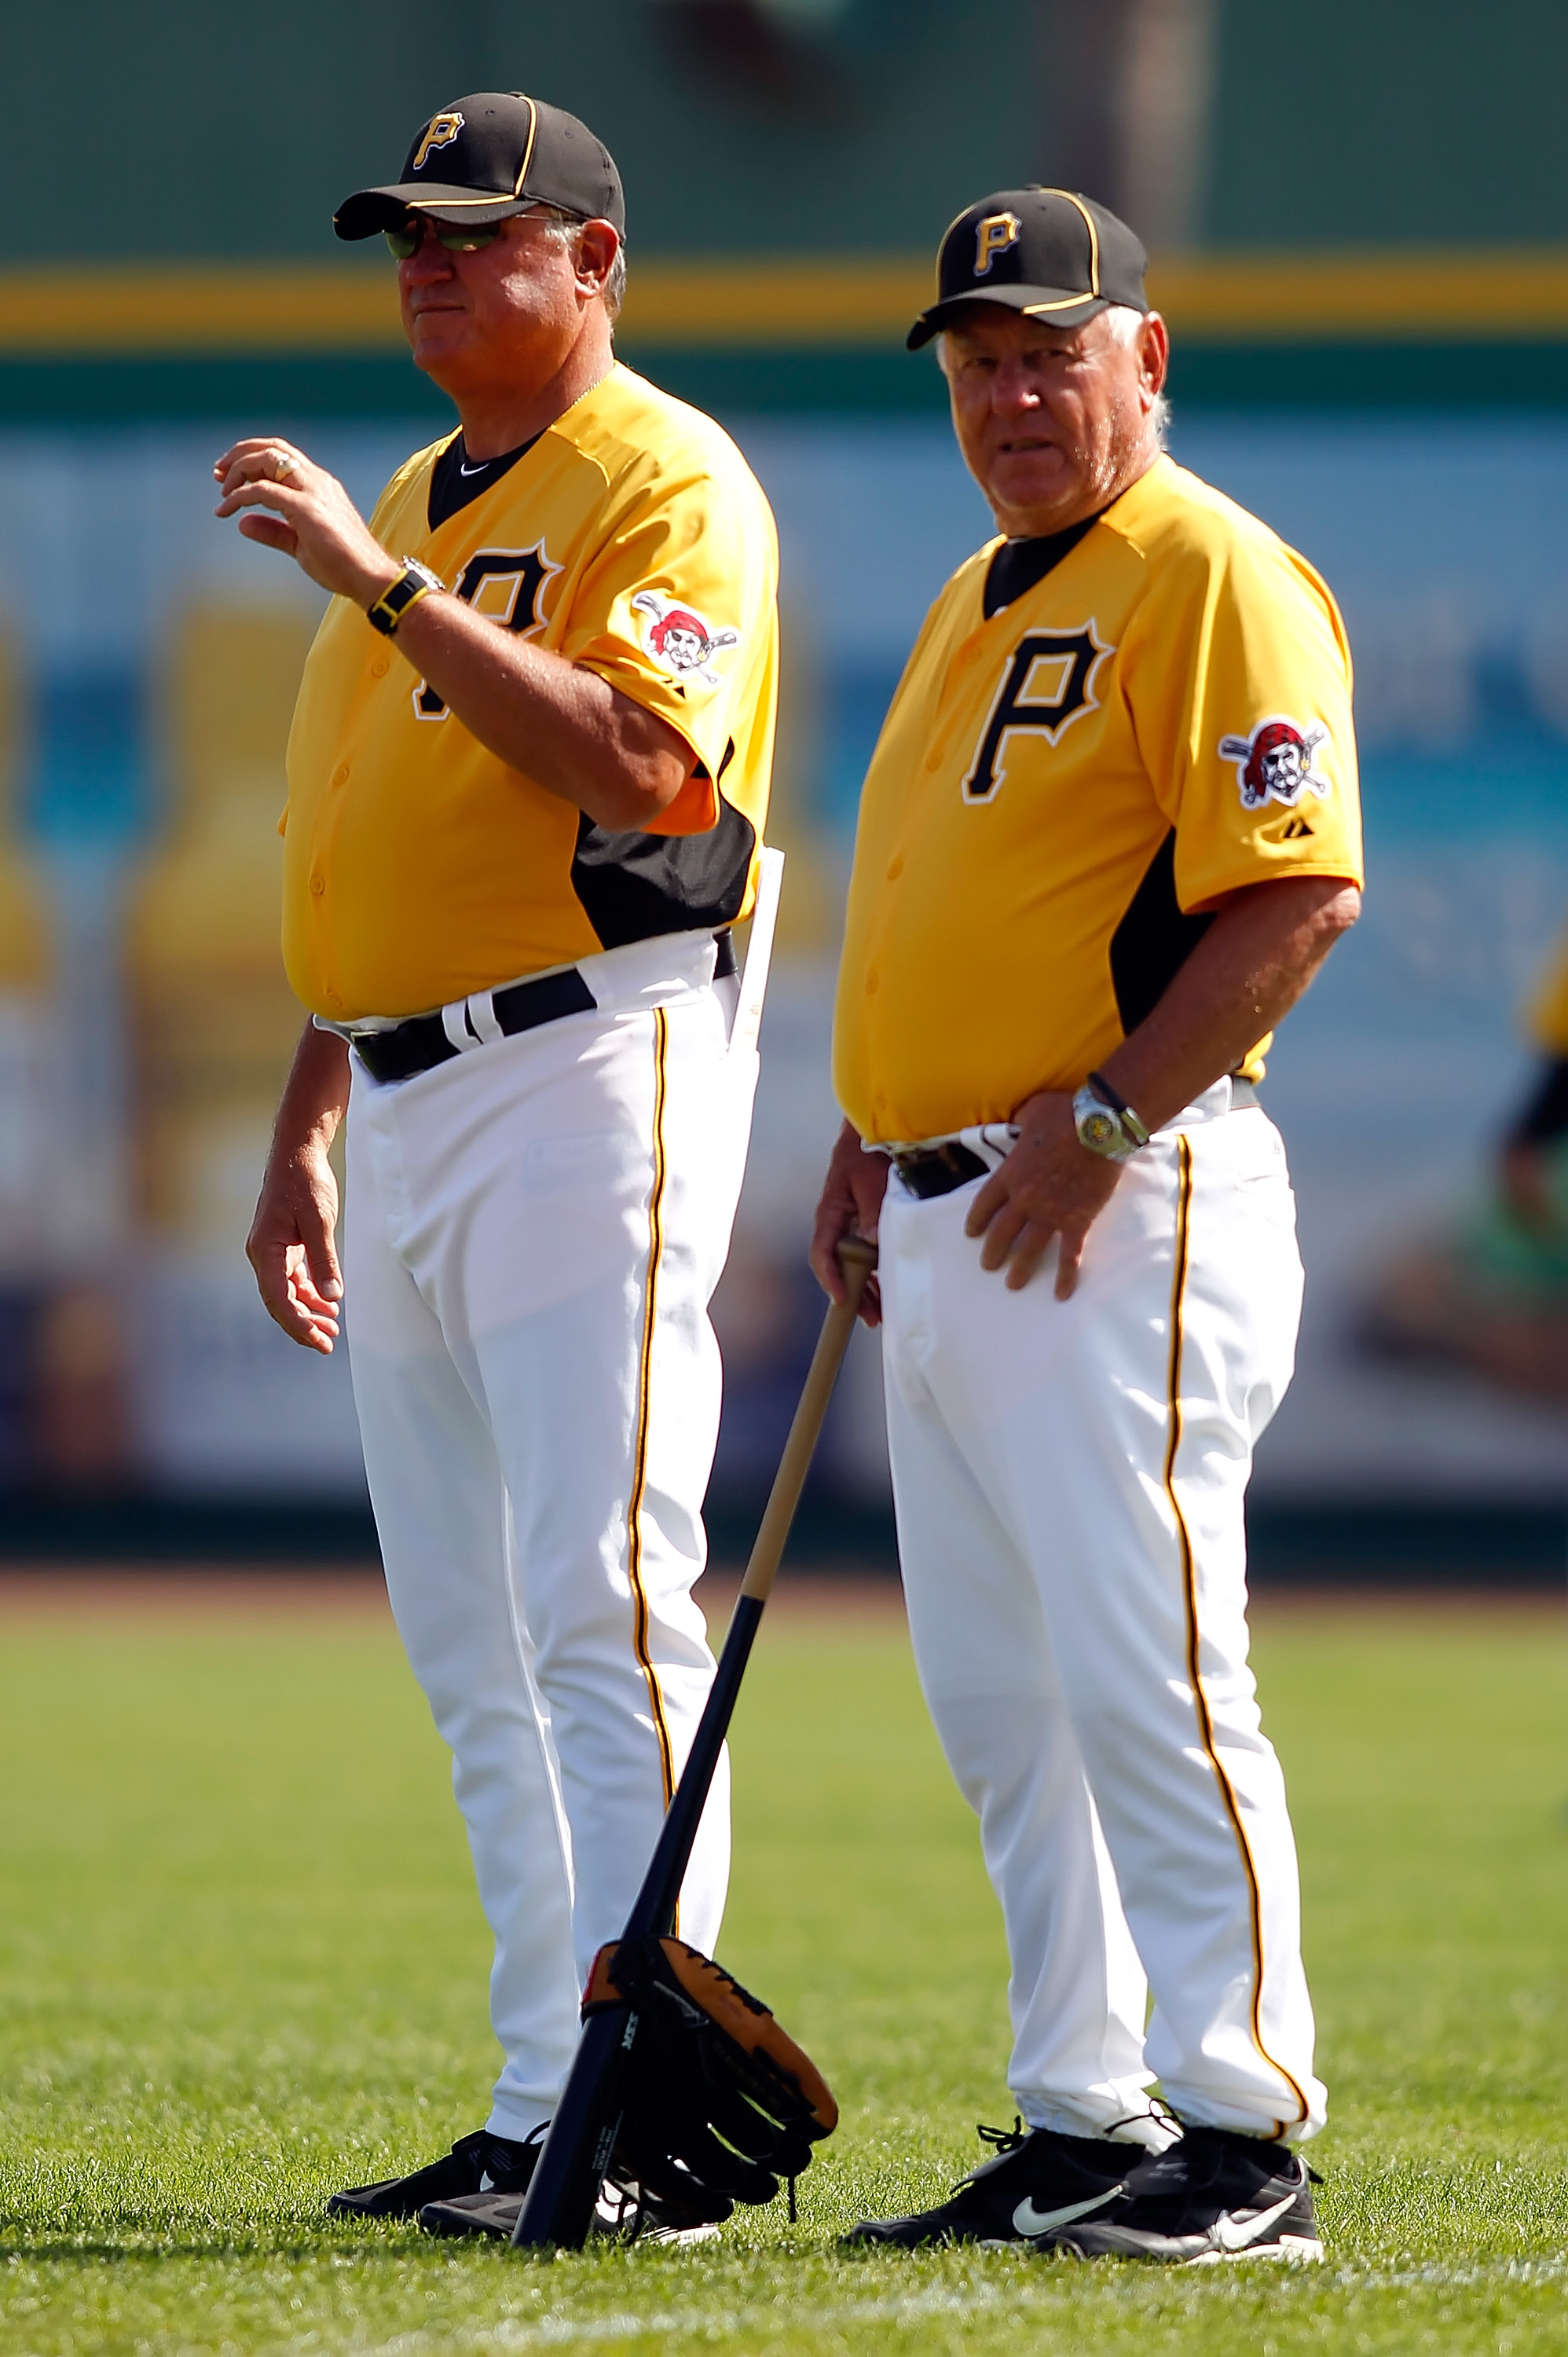 BRADENTON, FL - MARCH 02:  Manager Clint Hurdle #13 (L) stands with former player Bill Mazeroski of the Pittsburgh Pirates just before the start of the Grapefruit League Spring Training Game against the Minnesota Twins at McKechnie Field on March 2, 2011